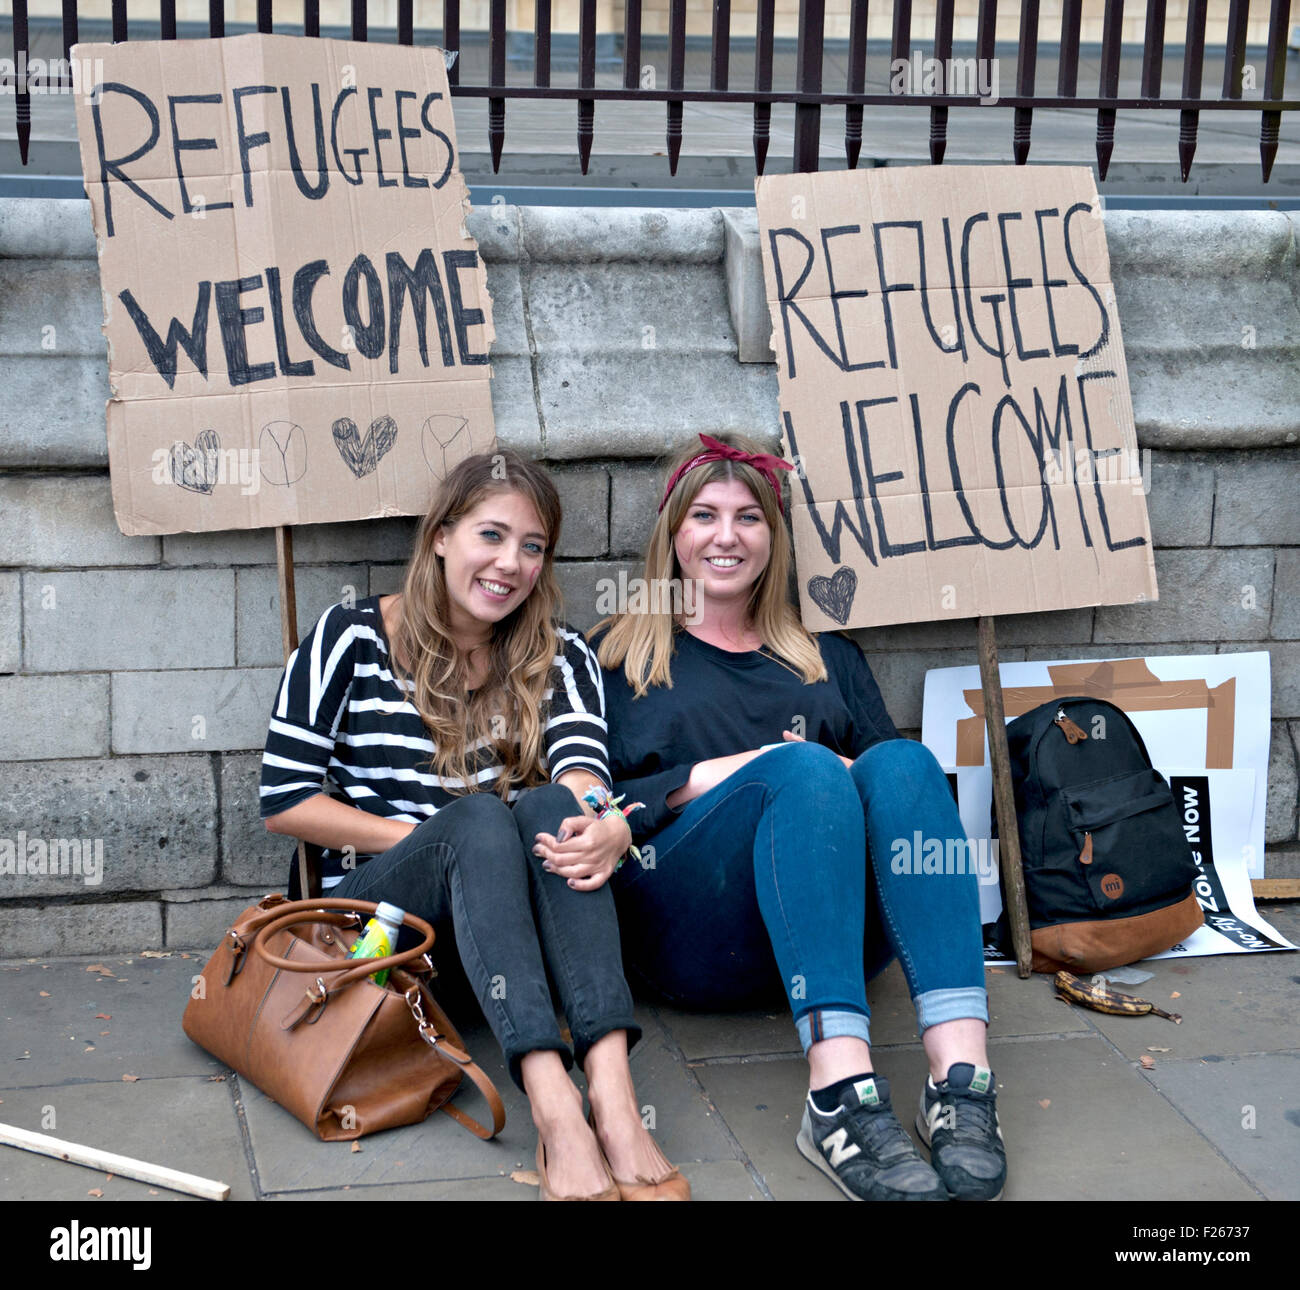 london-uk-12th-sep-2015-two-girls-rest-during-a-rally-to-show-solidarity-F26737.jpg